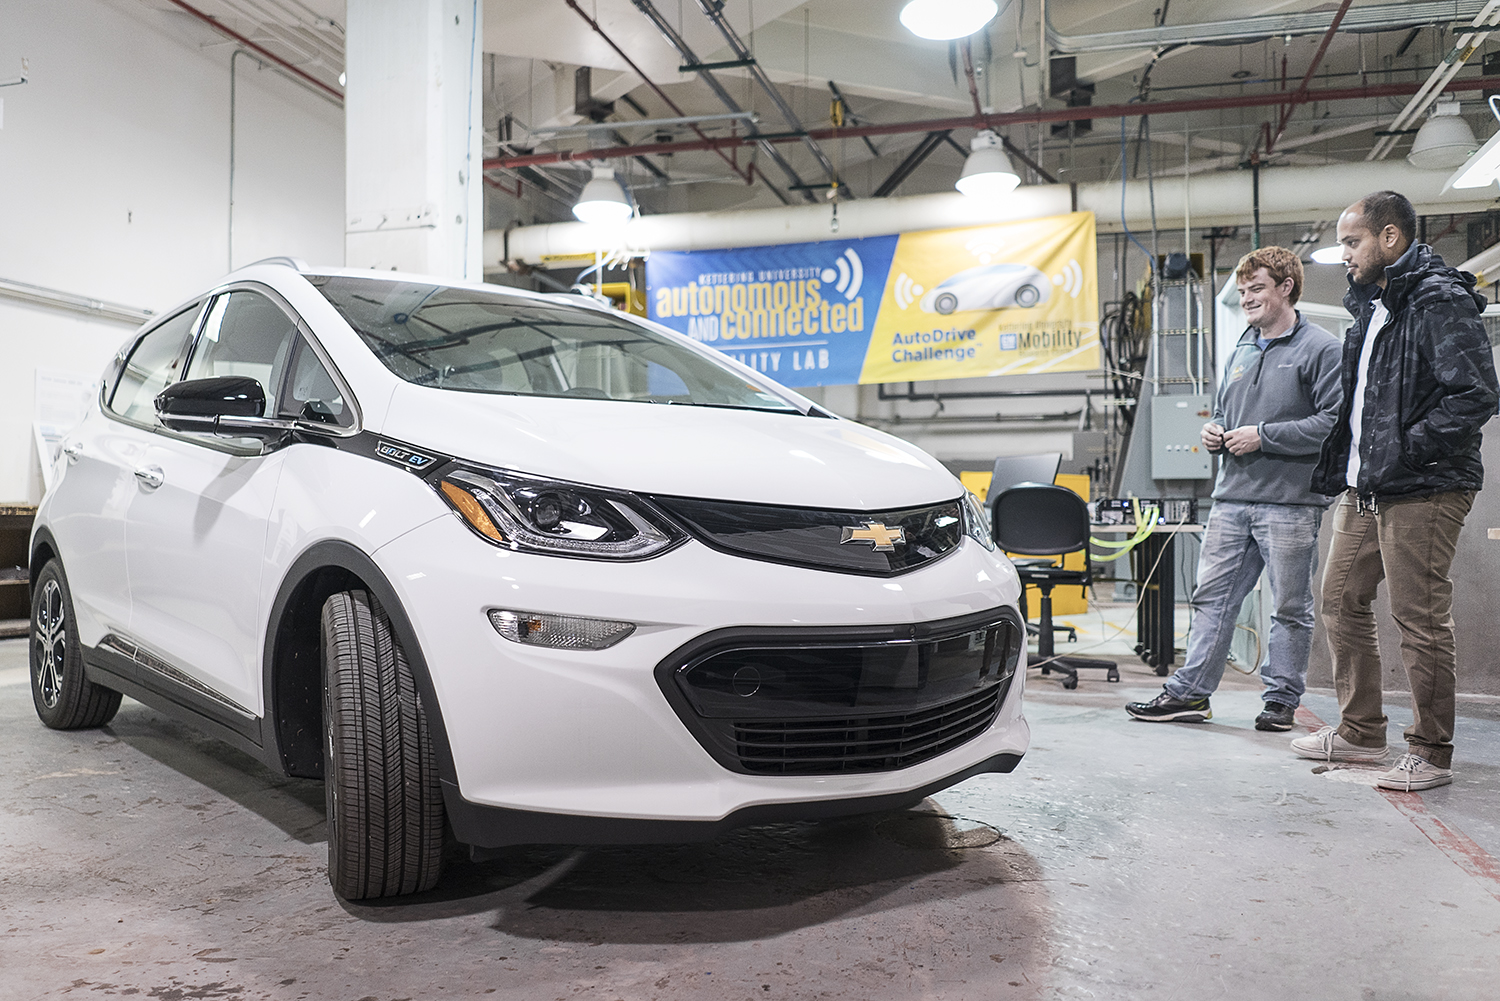 Flint, MI - Friday, November 10, 2017: Student coordinators for the SAE/GM AutoDrive Competition Alex Rath, 22 (left) and Shobit Sharma, 26, survey the new Chevrolet Bolt provided to the university for the competition in the garage at Kettering Unive